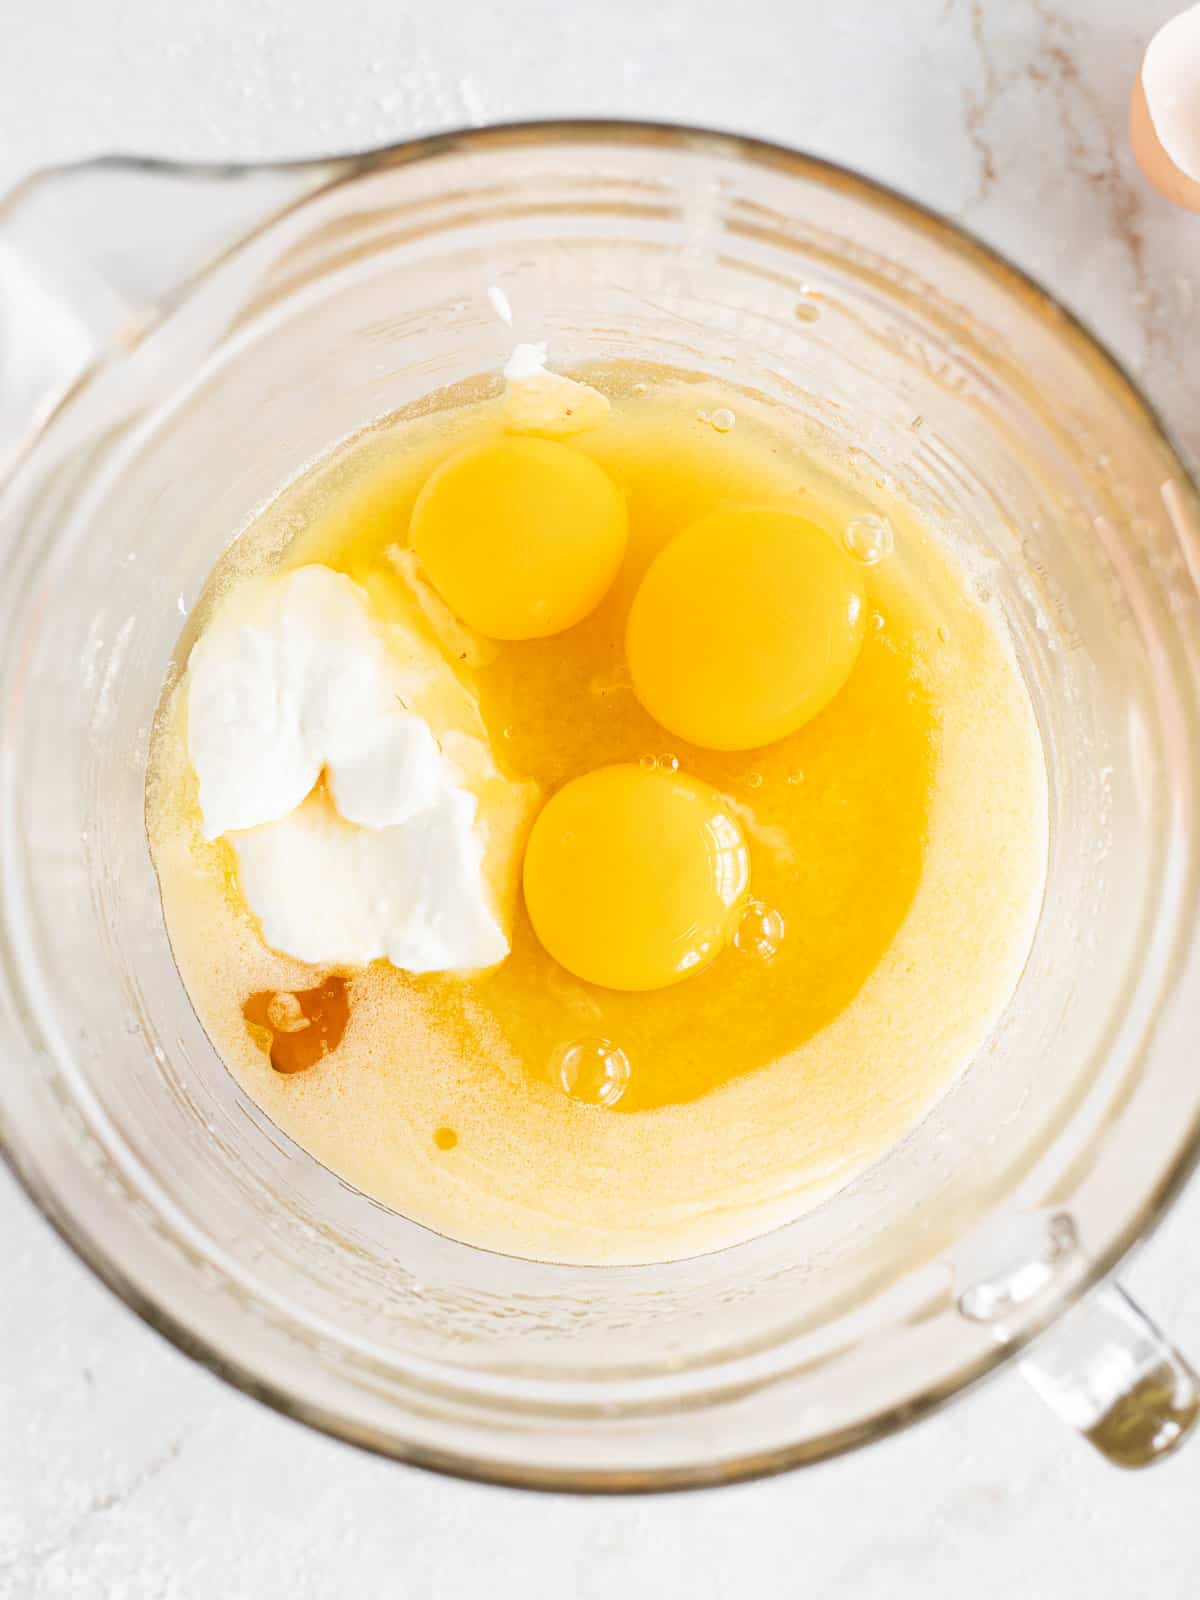 melted butter, sugar, eggs, and sour cream mixed together in a glass bowl.